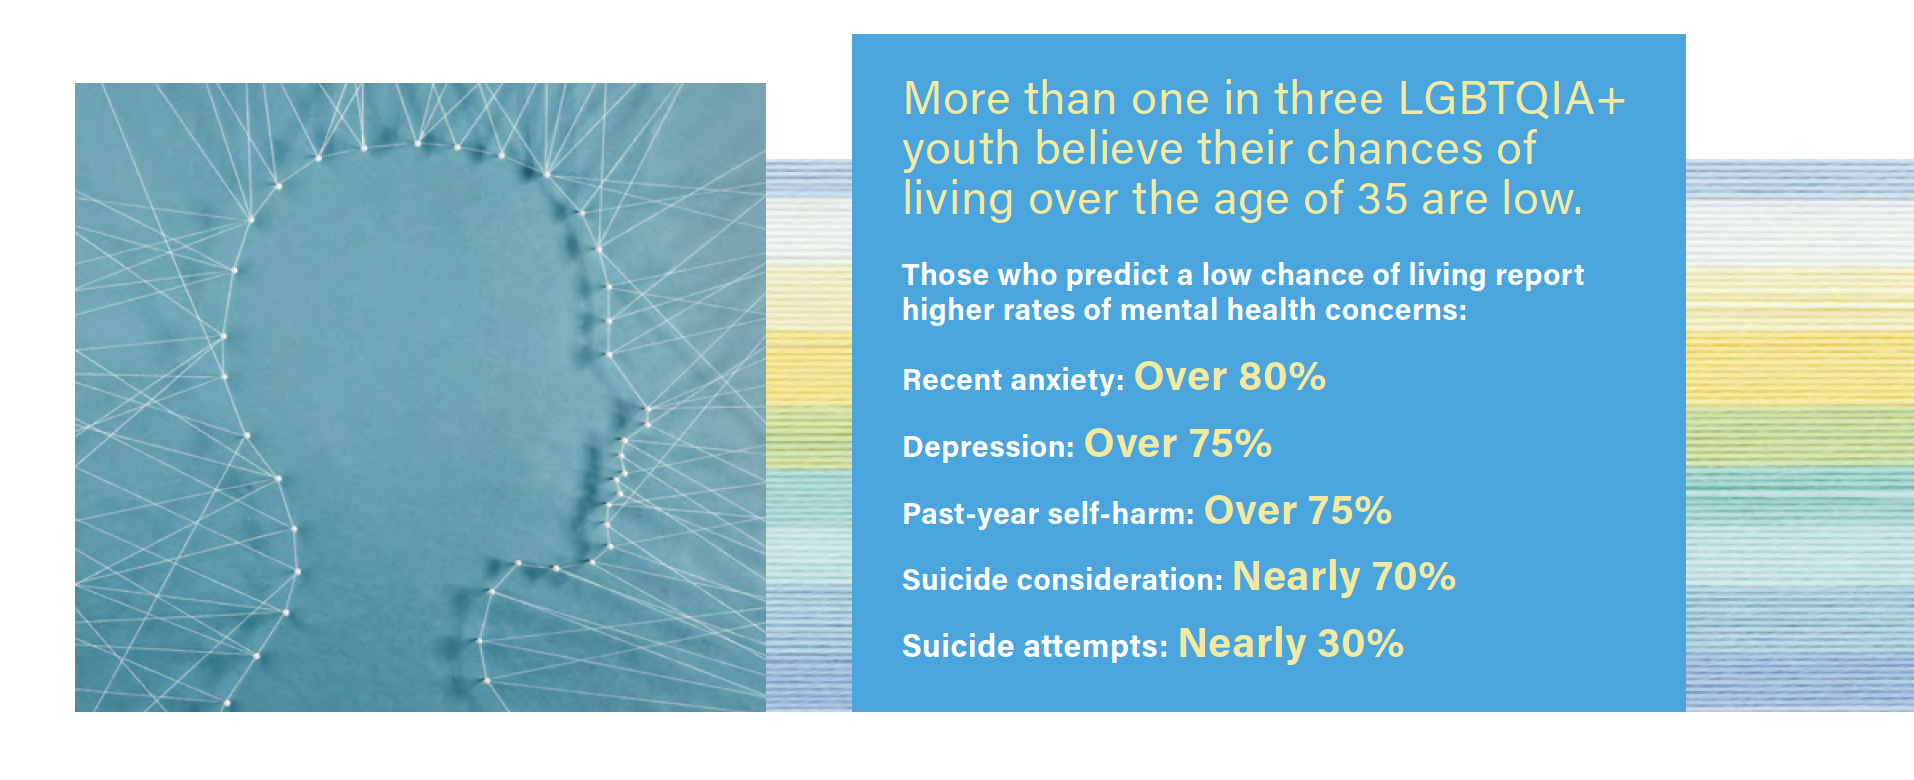 Inforgraphic about LGBTQIA+ youth mental health concerns in statistics